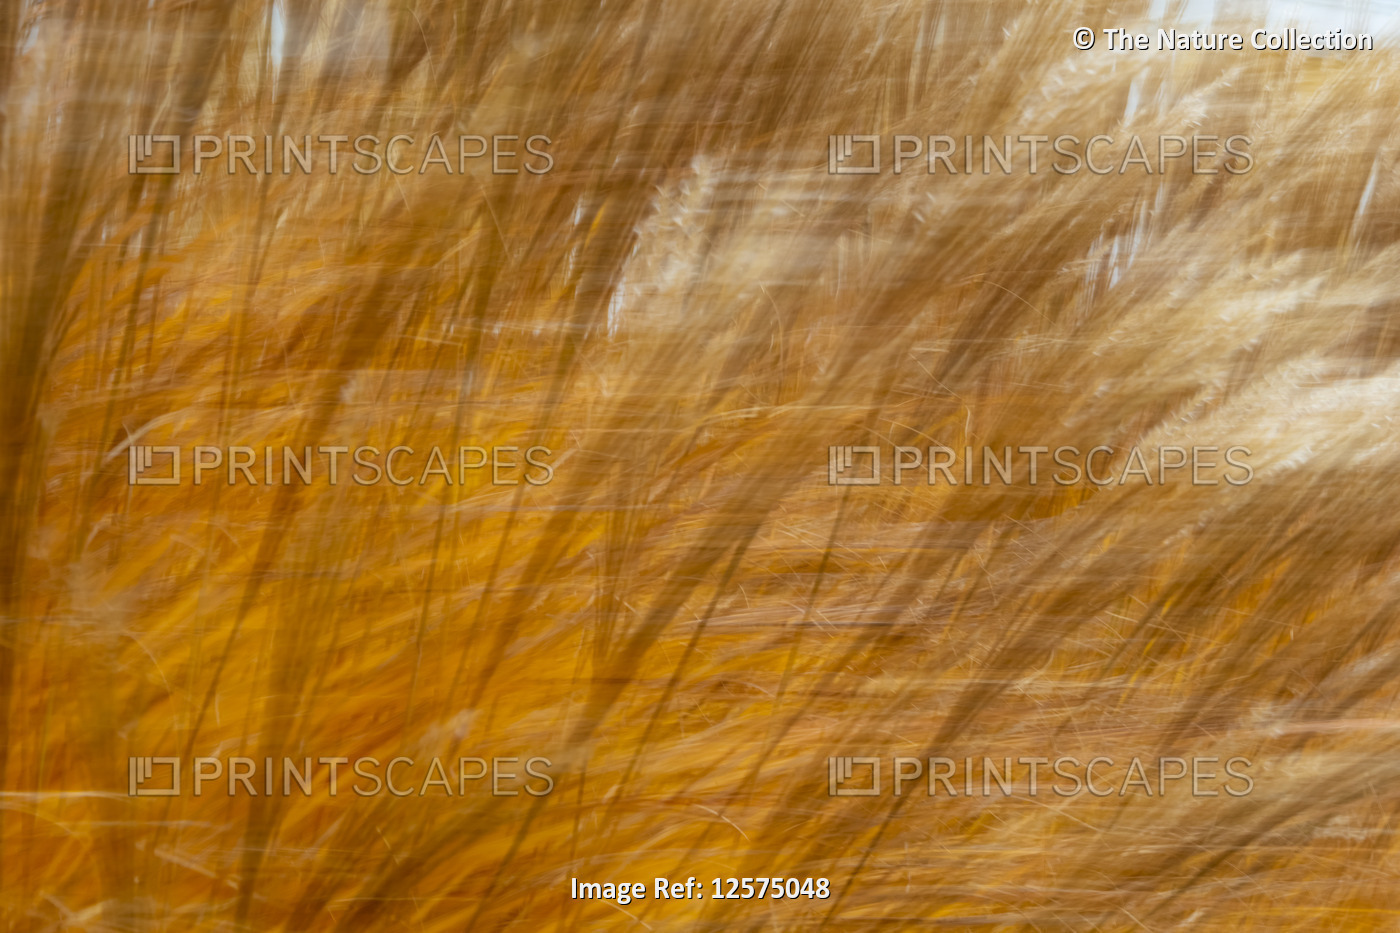 Golden grasses blowing in the wind; Canada